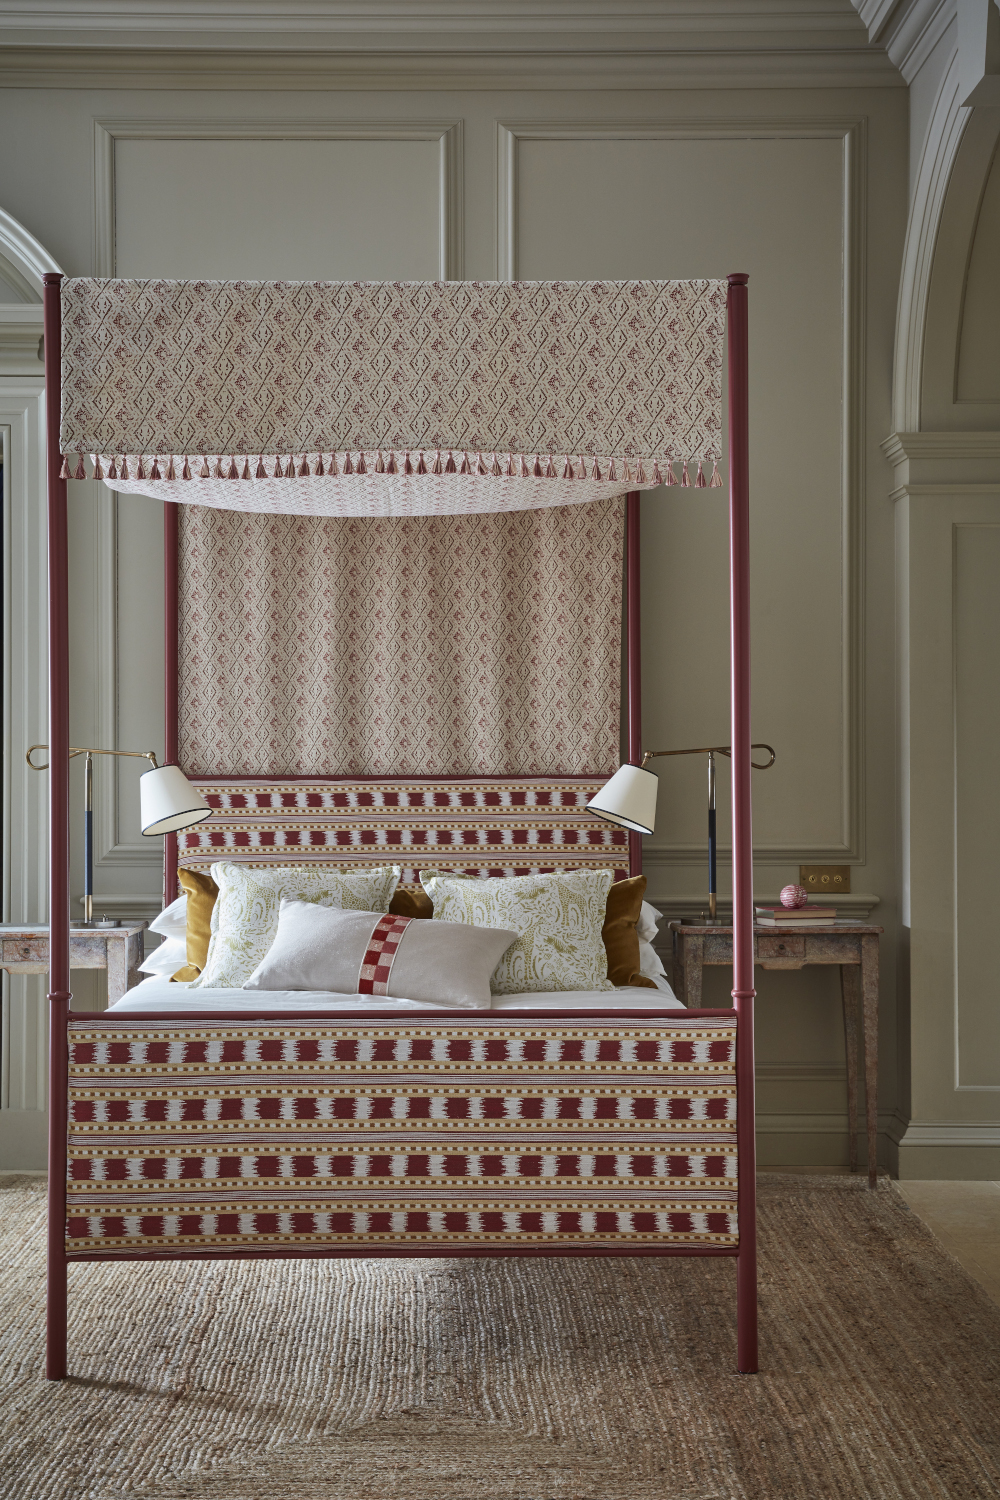 Image of upholstered bed frame in red and gold.